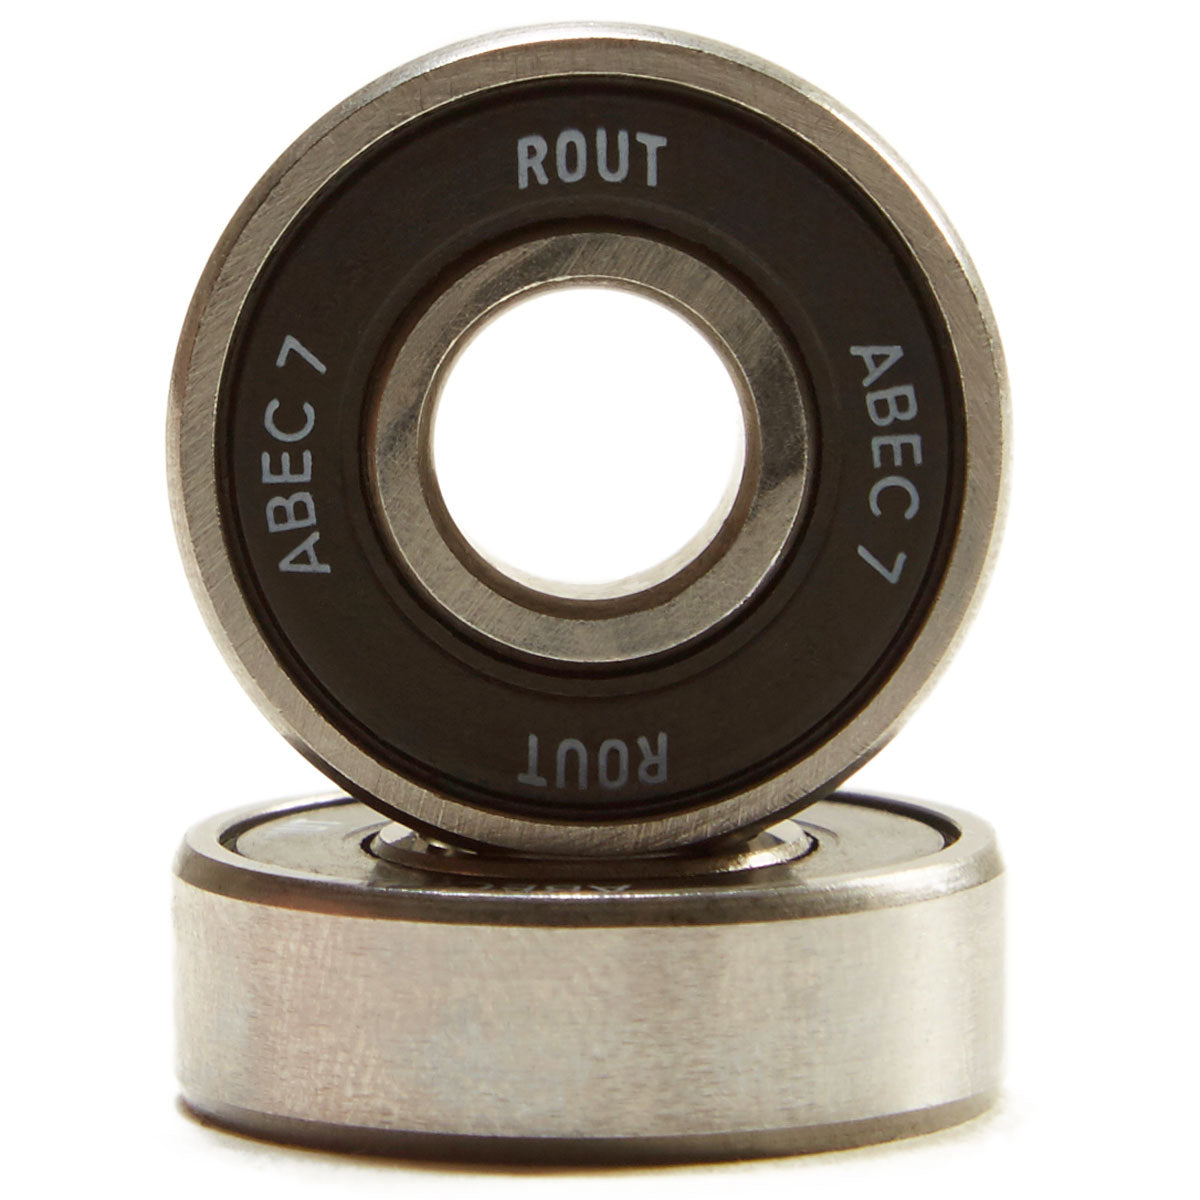 Rout Supply Co. Roller Bearings - 16 Pack - 8mm image 1